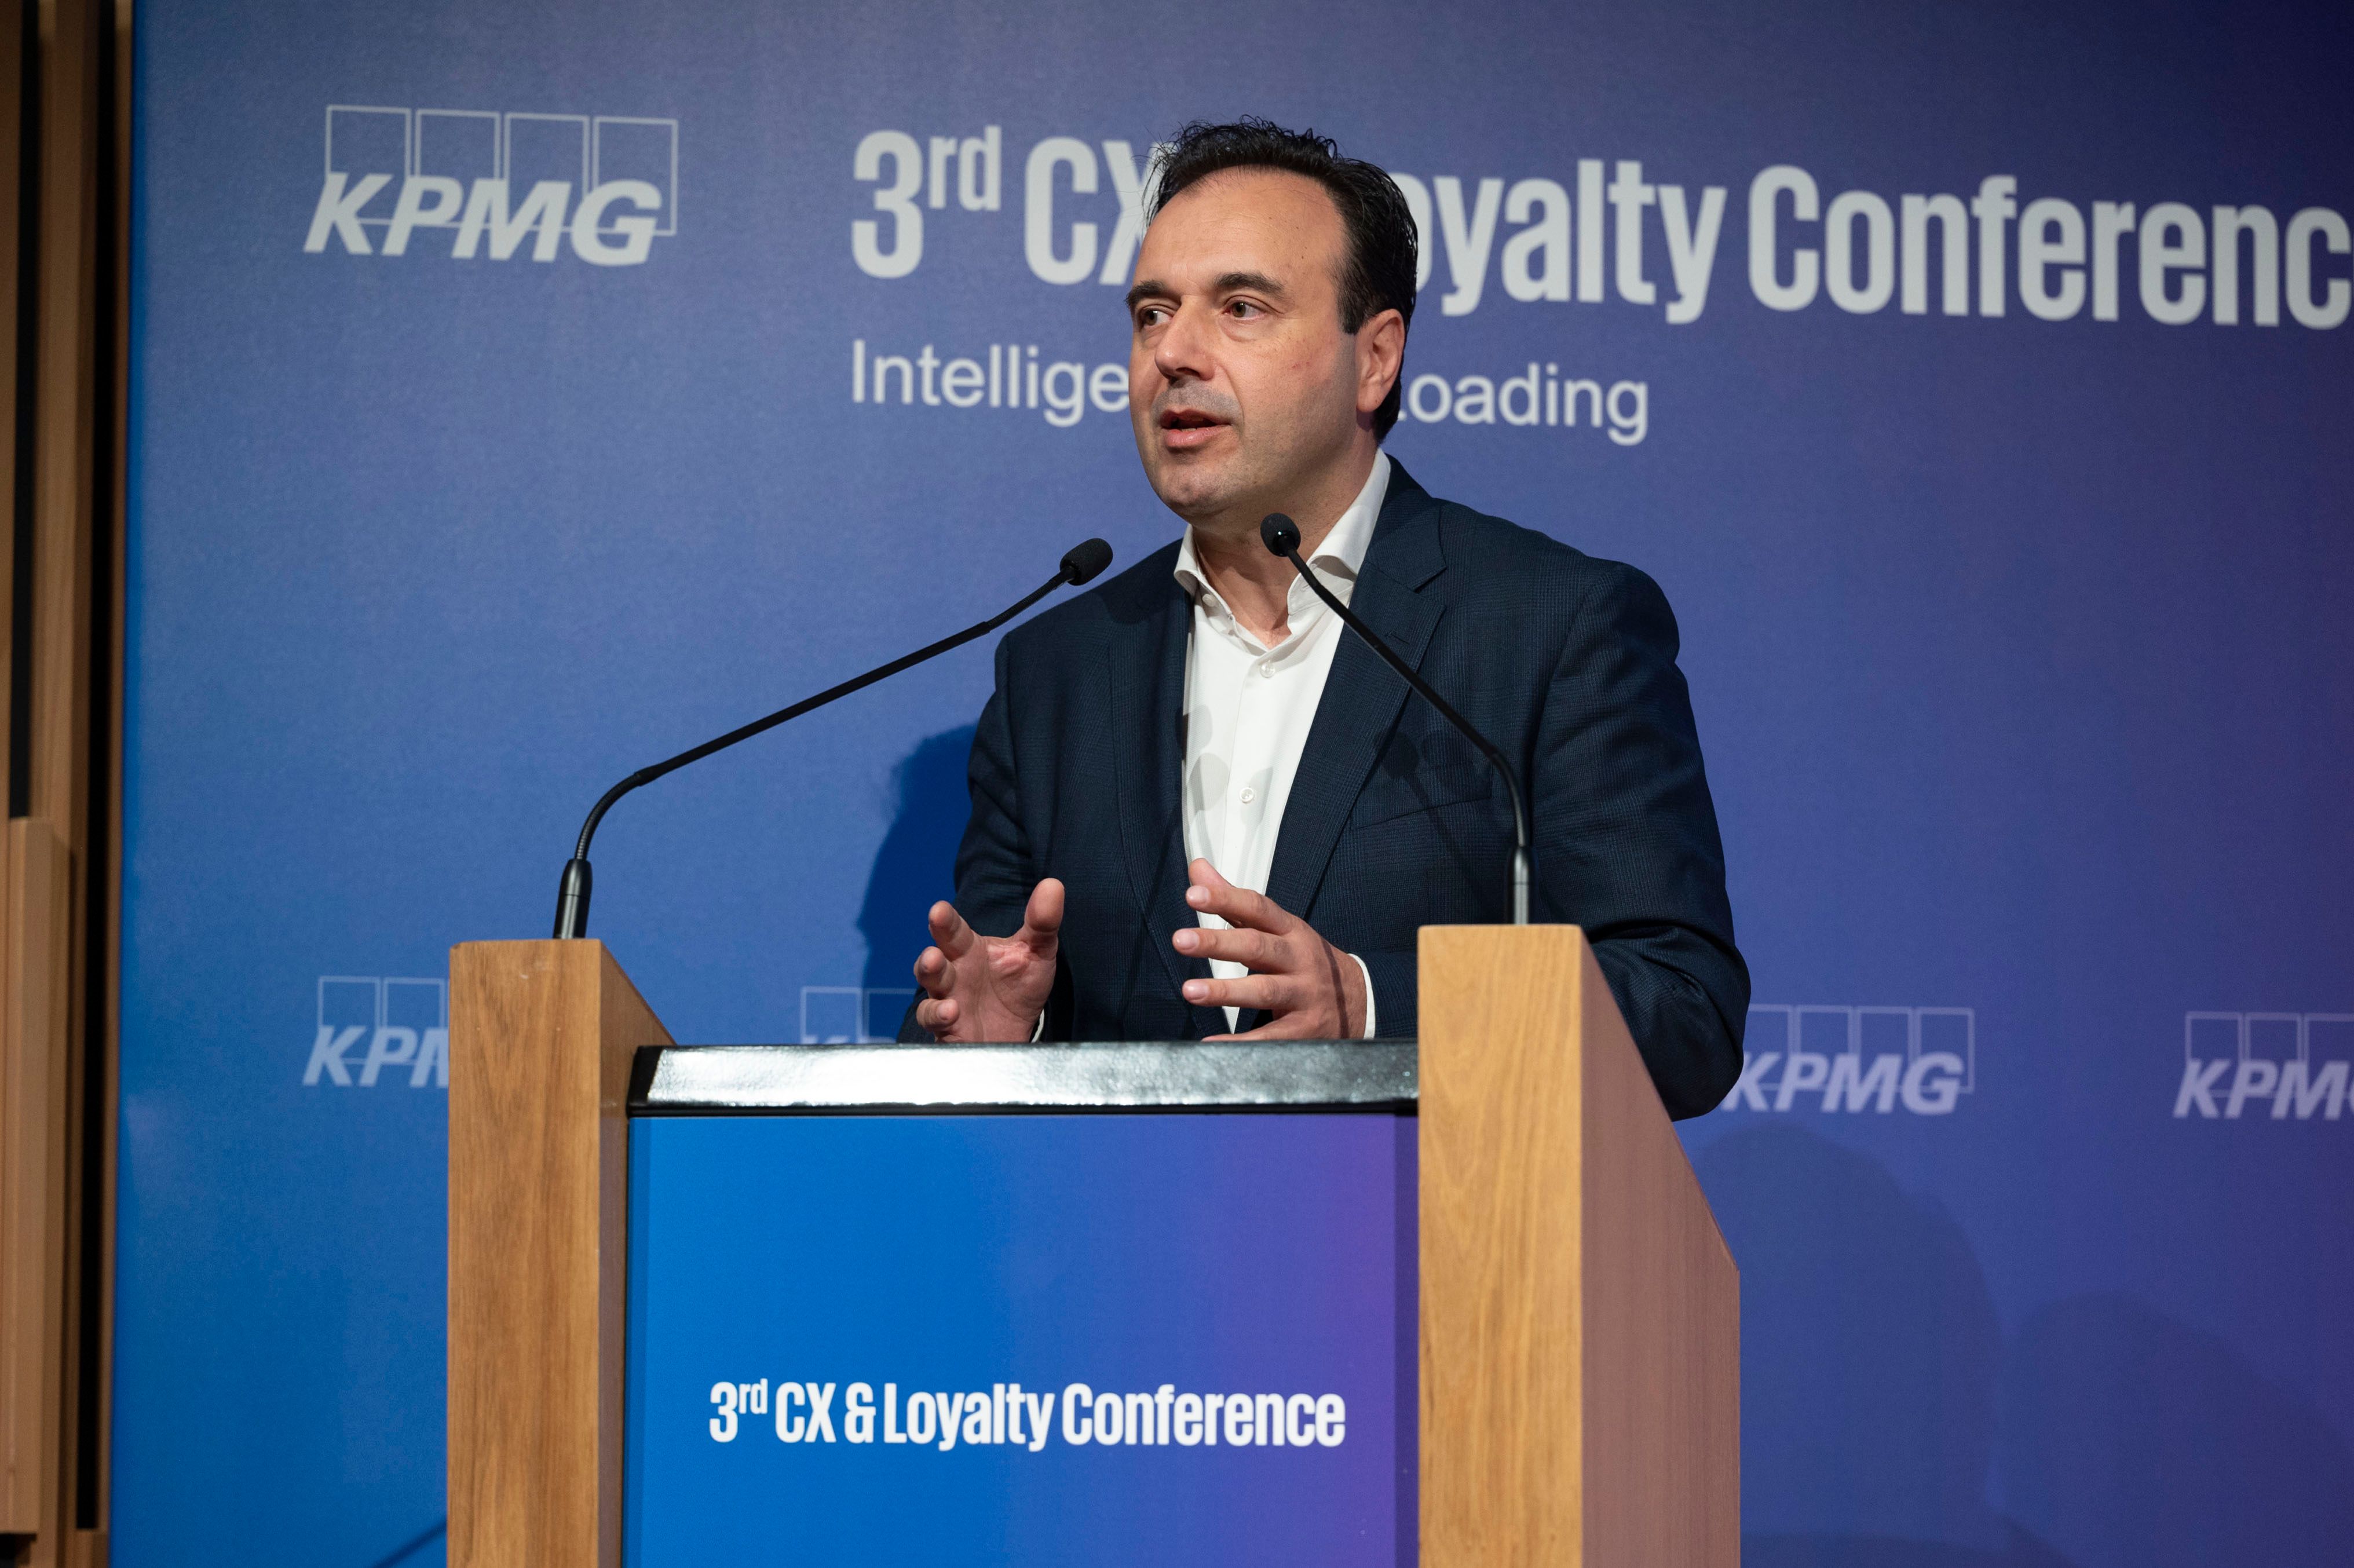 dimitris papastergiou at 3rd cx and loyalty conference of kpmg greece